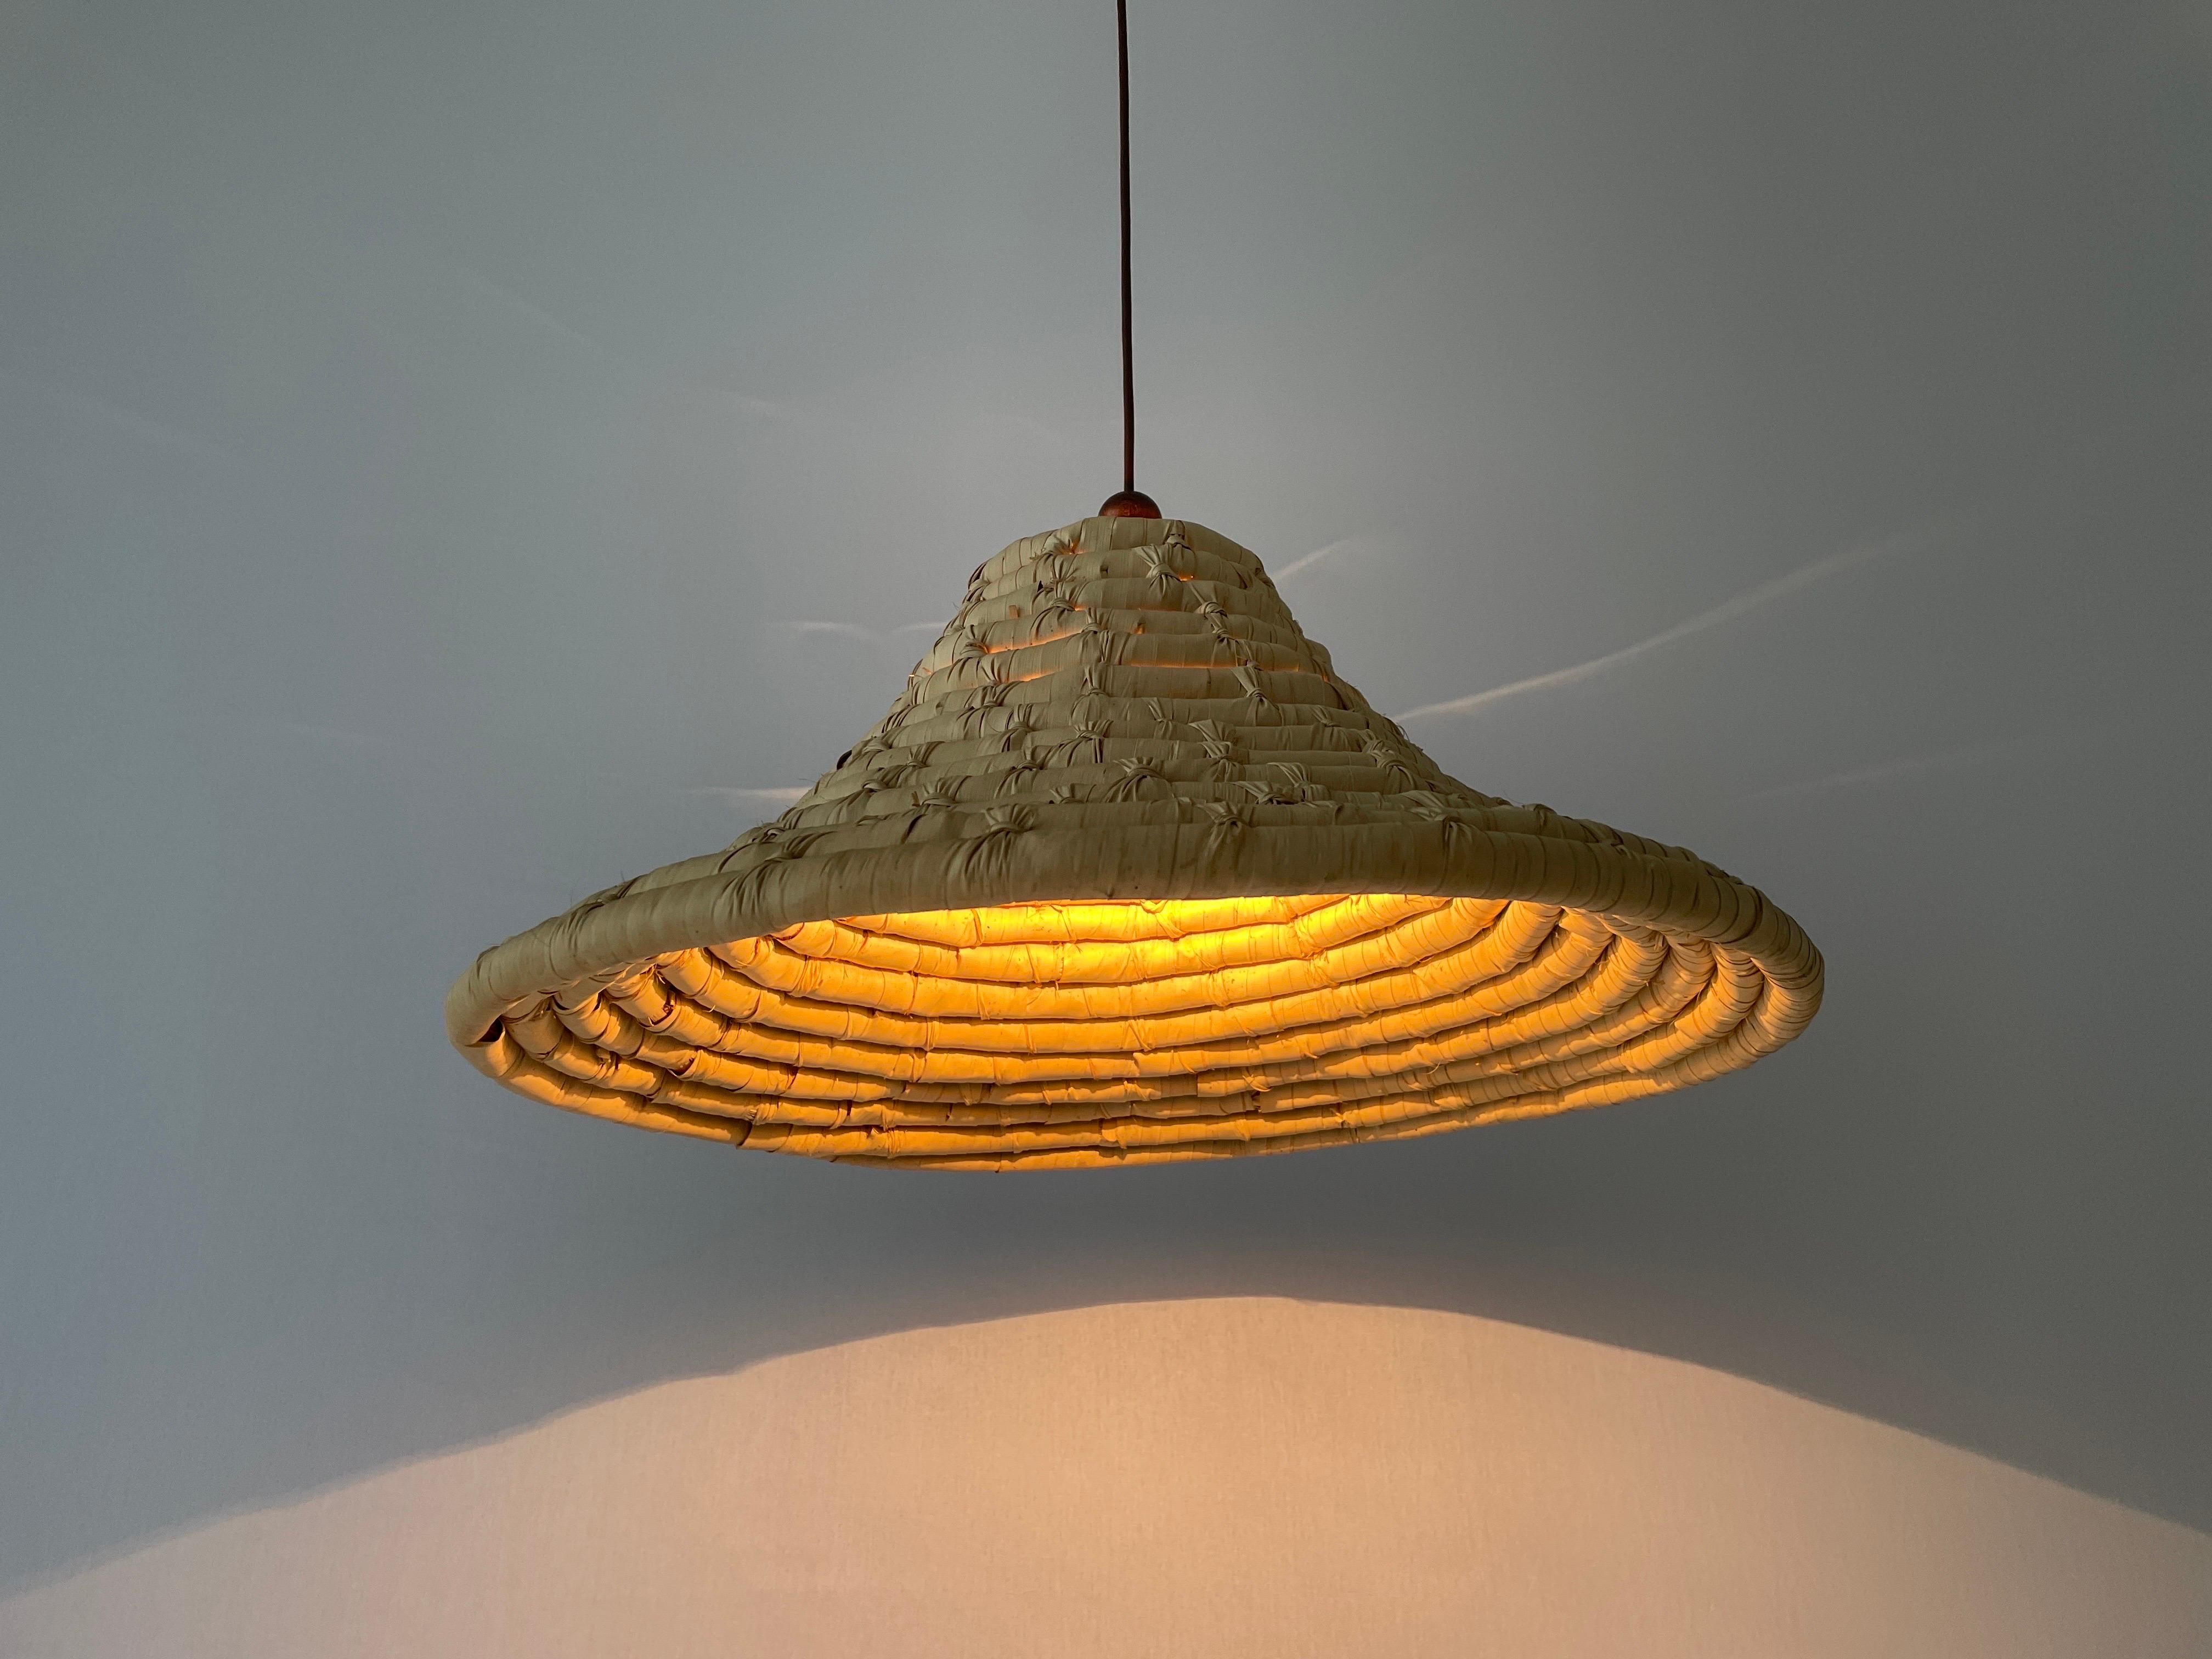 Unusual Large Made of Natural Plant Material Pendant Lamp, 1960s, Germany For Sale 5